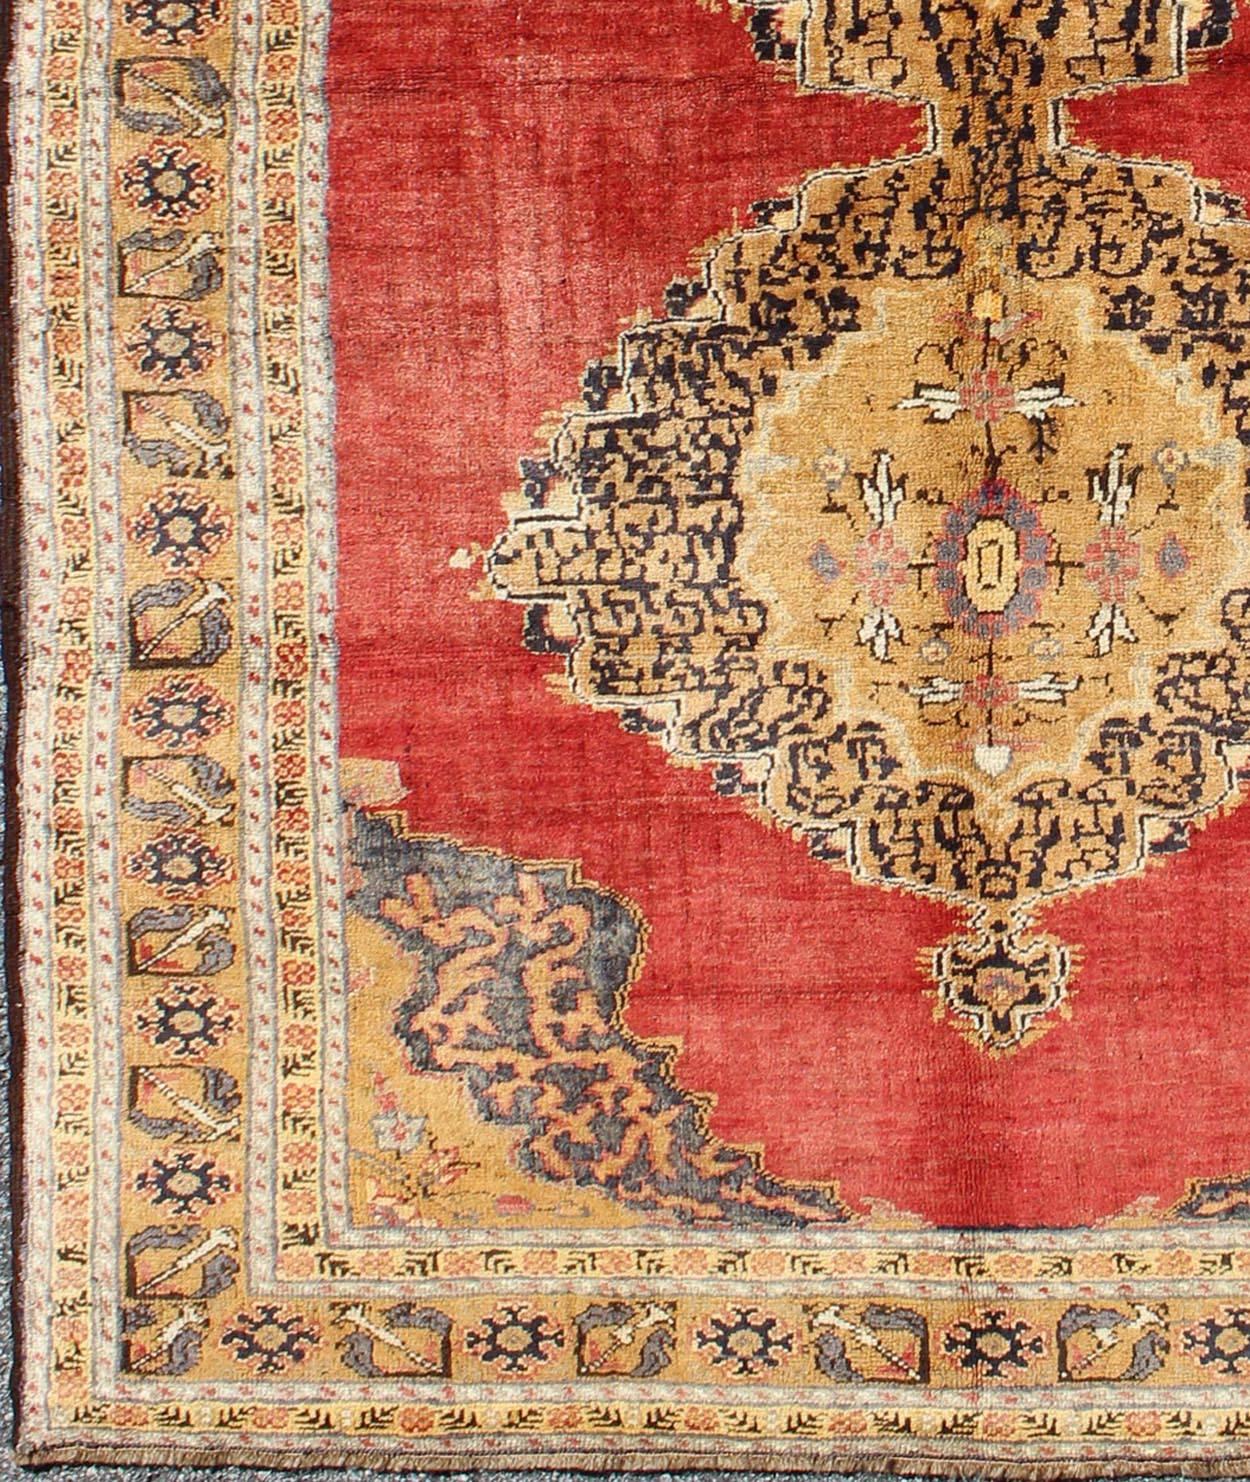 Made is the late Ottoman era, this stunning Turkish rug displays a red background with two medallions in the center. The medallions are in gold with black scroll works while the four corners and borders are in gold with gray and black highlights.